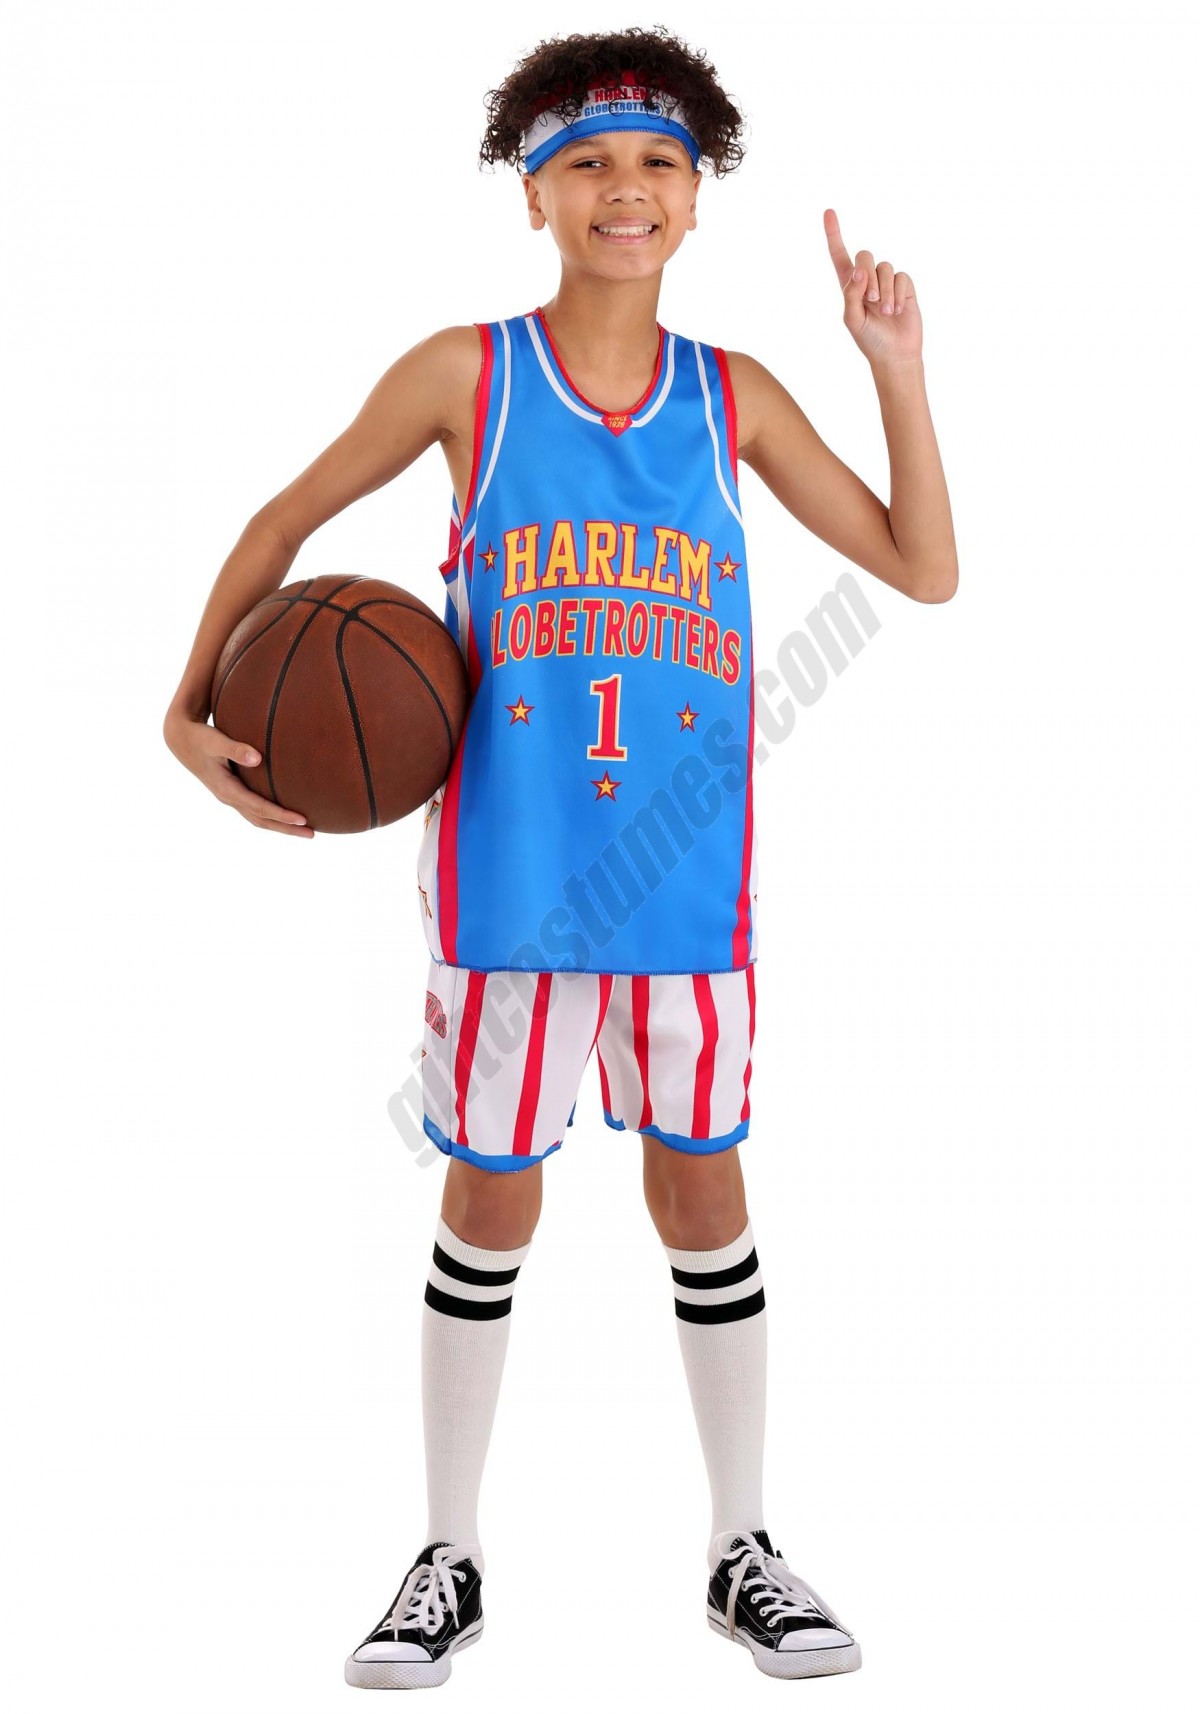 Teen's Harlem Globetrotters Costume Promotions - -0